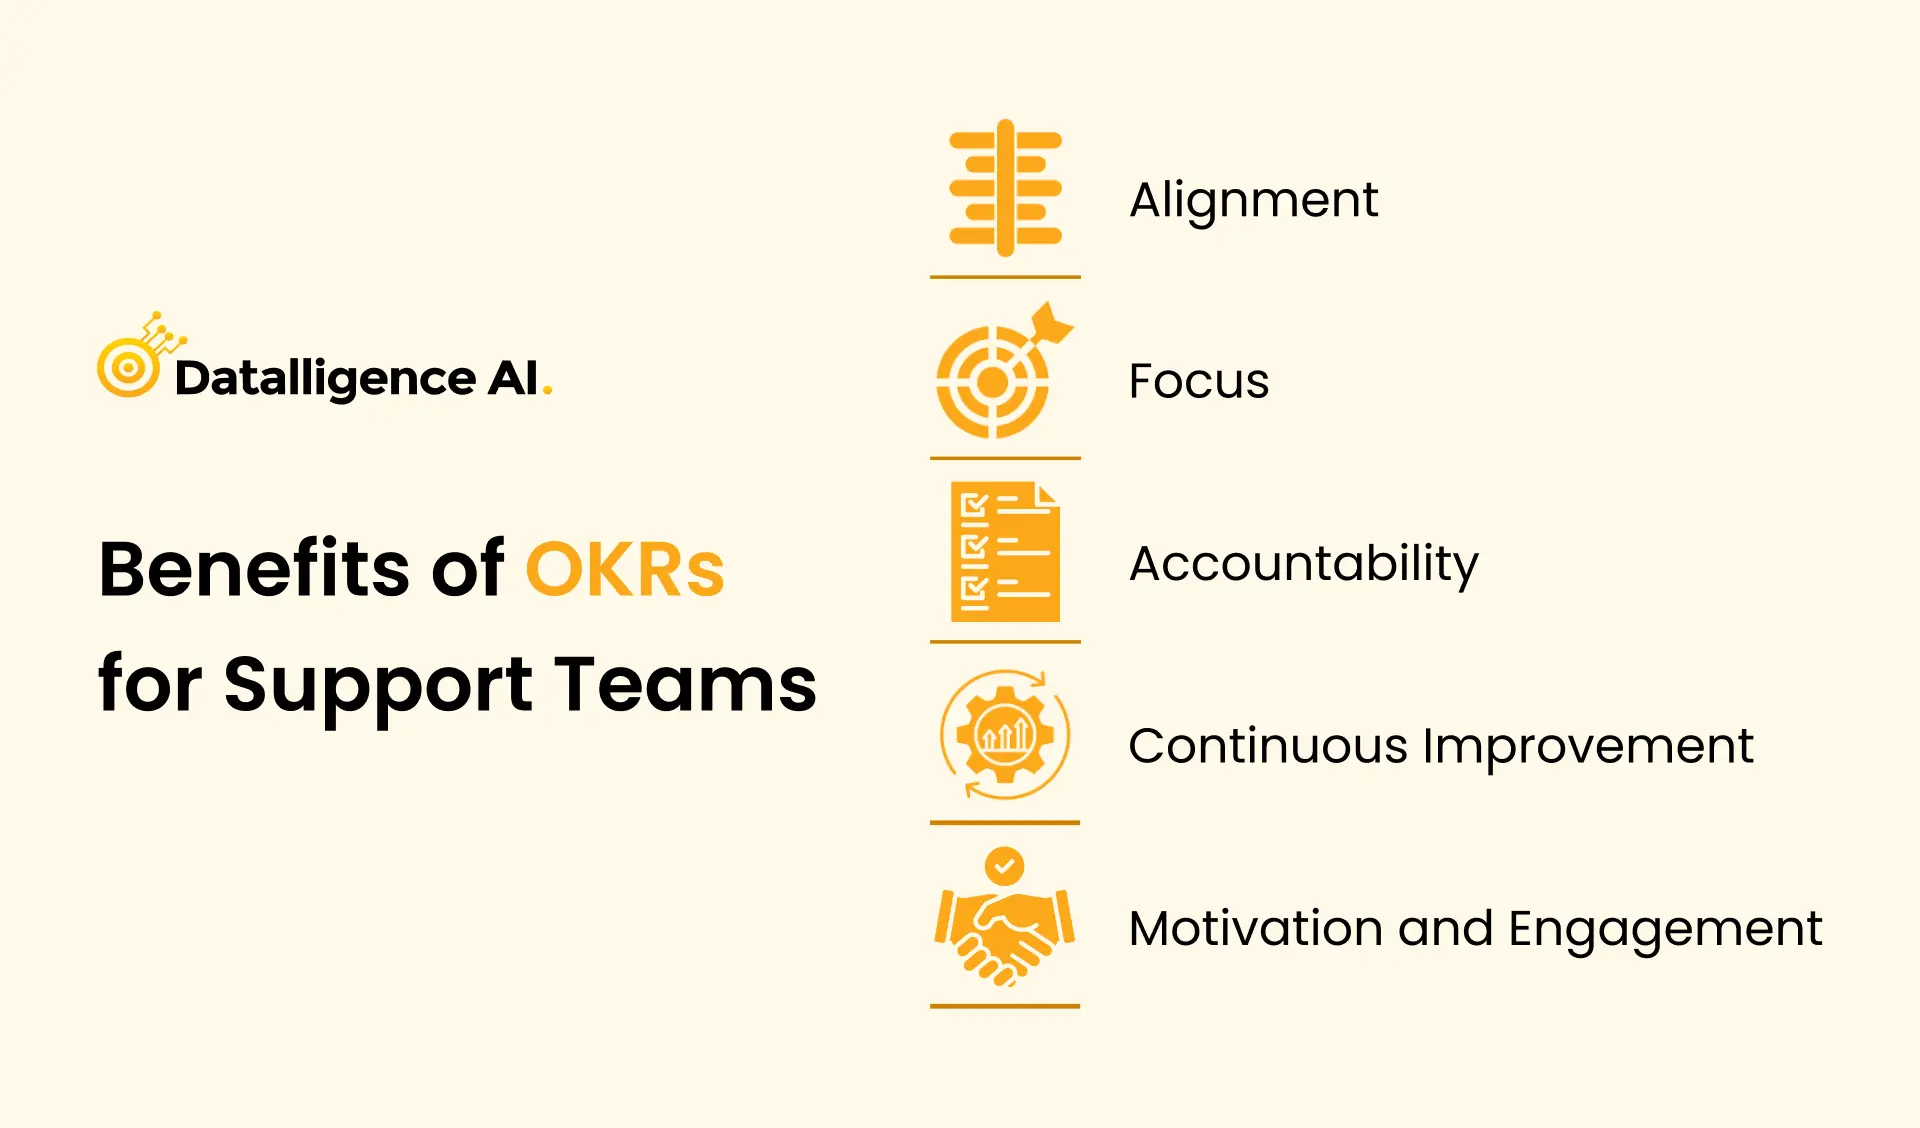 Benefits of OKRs for Support Teams